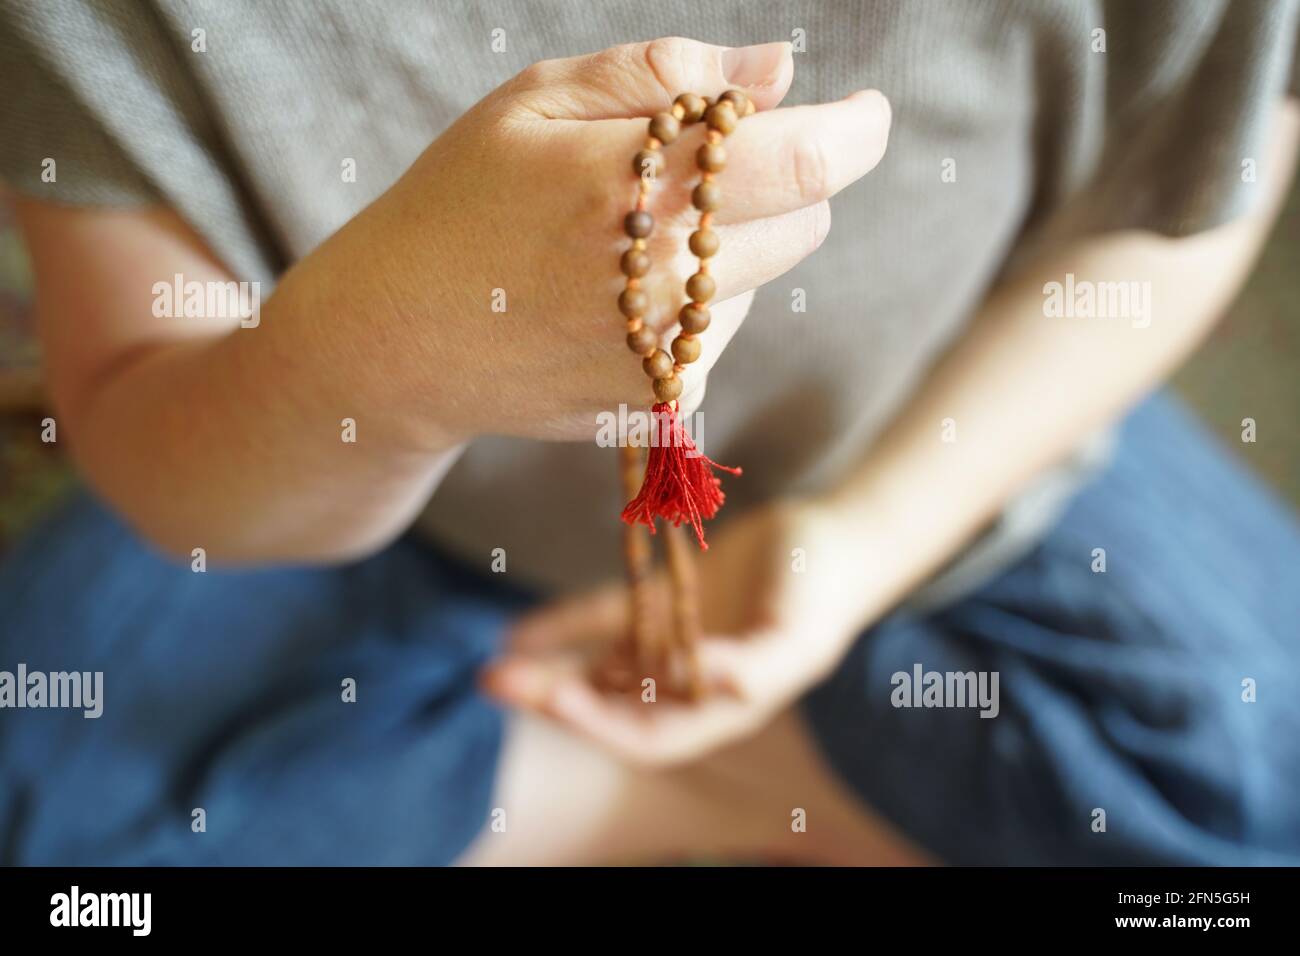 A  woman holding a mala yoga prayer bead necklace in her hand. Stock Photo